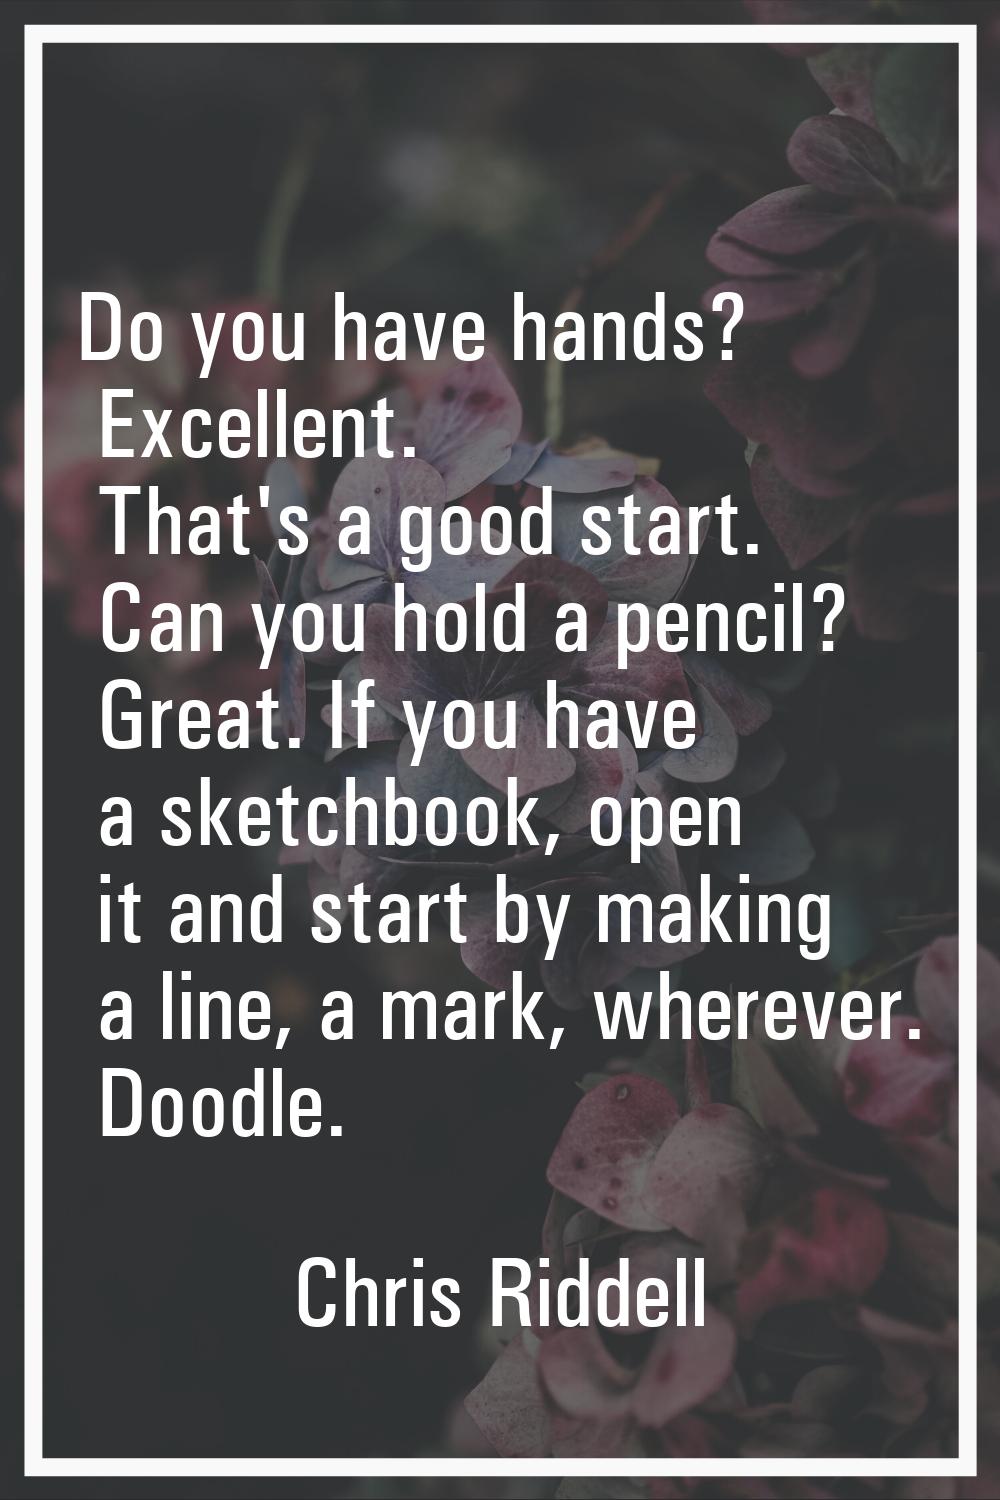 Do you have hands? Excellent. That's a good start. Can you hold a pencil? Great. If you have a sket